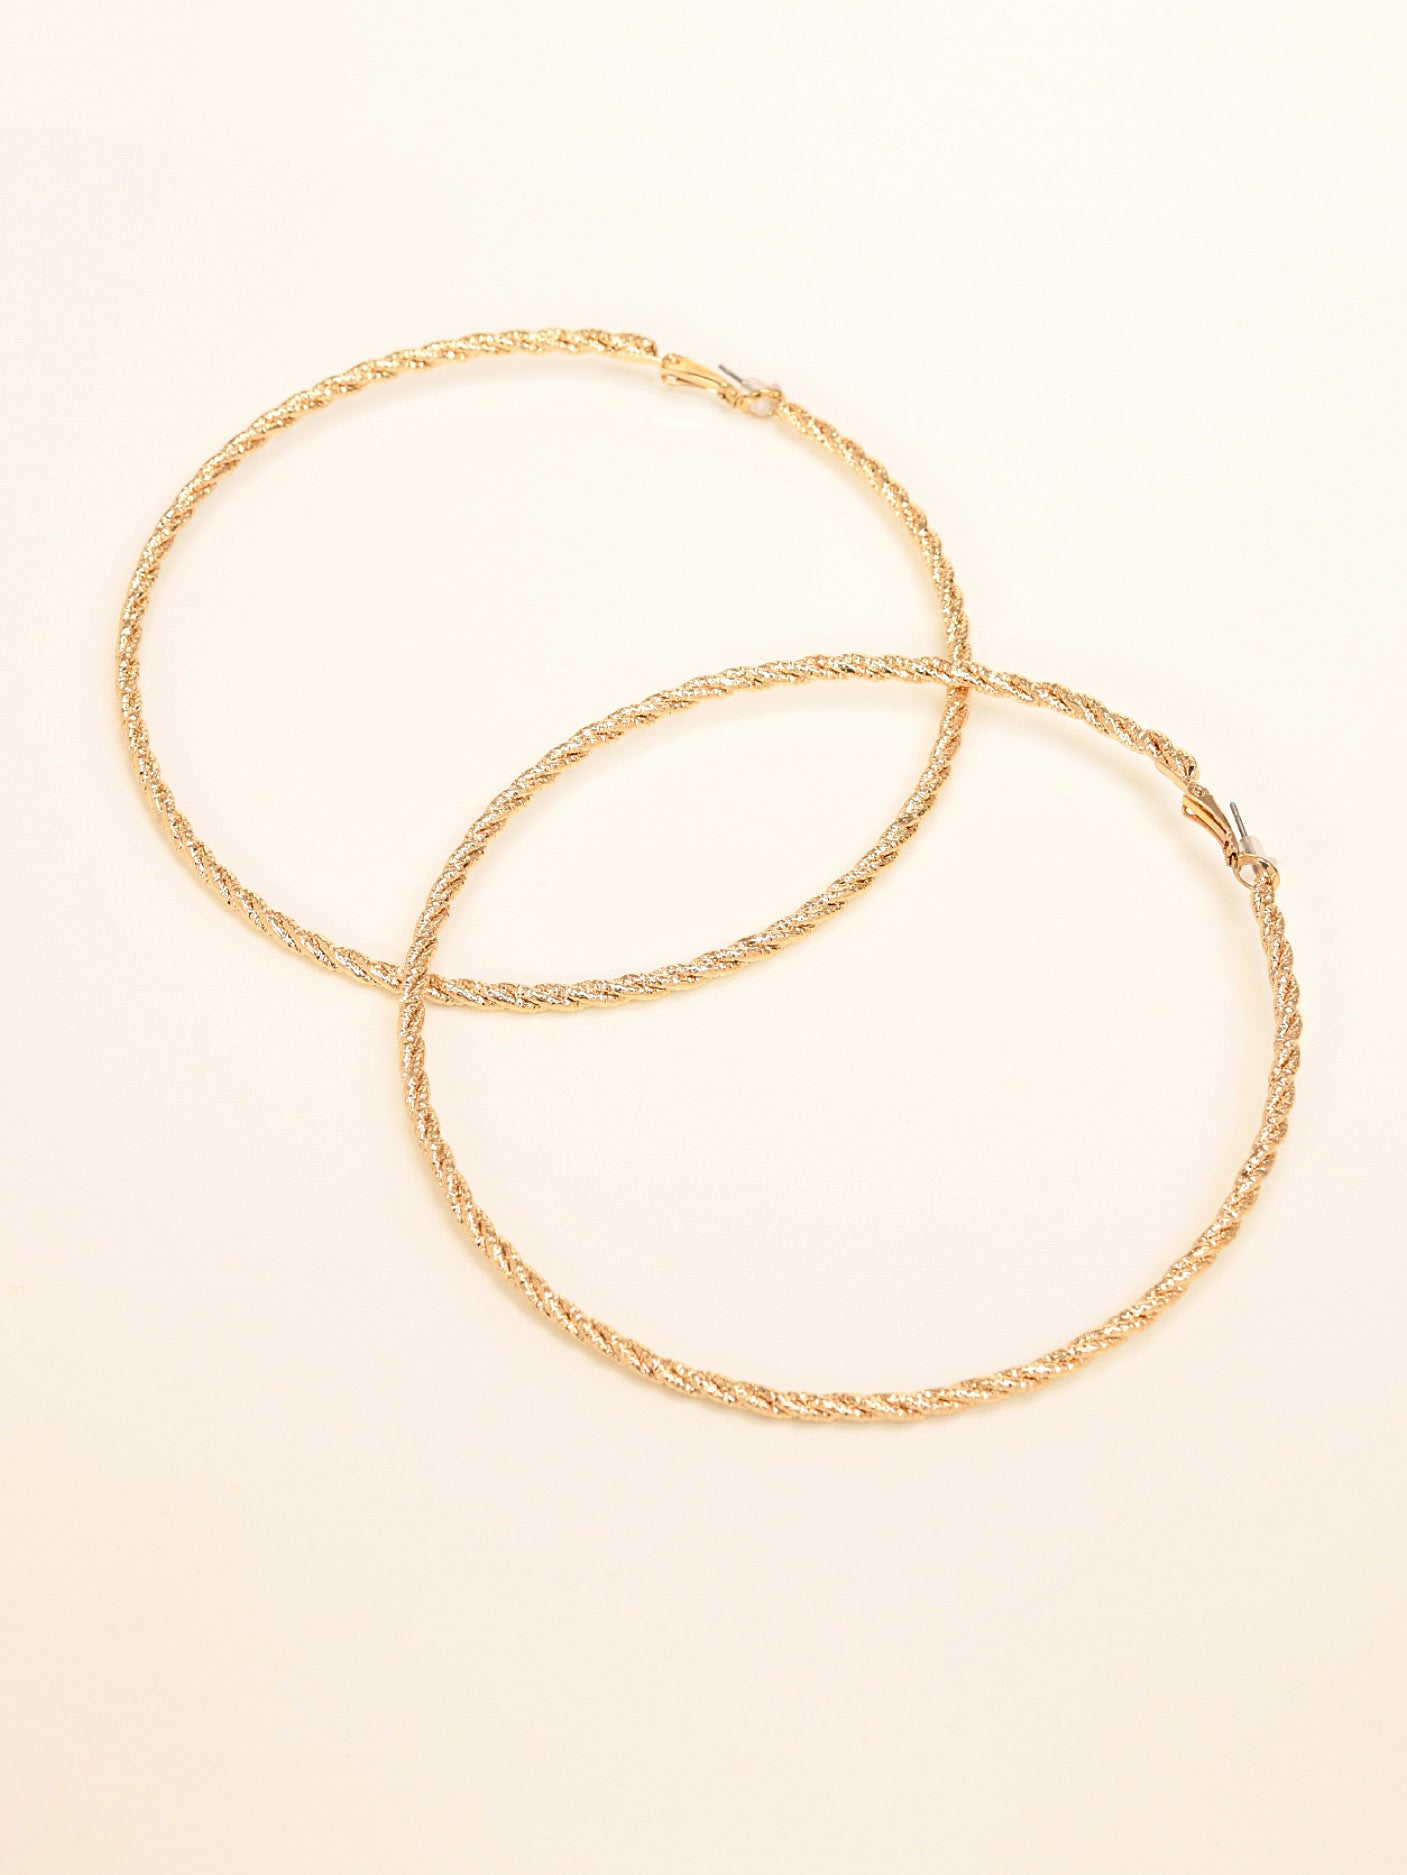 Giant Twisted Hoops